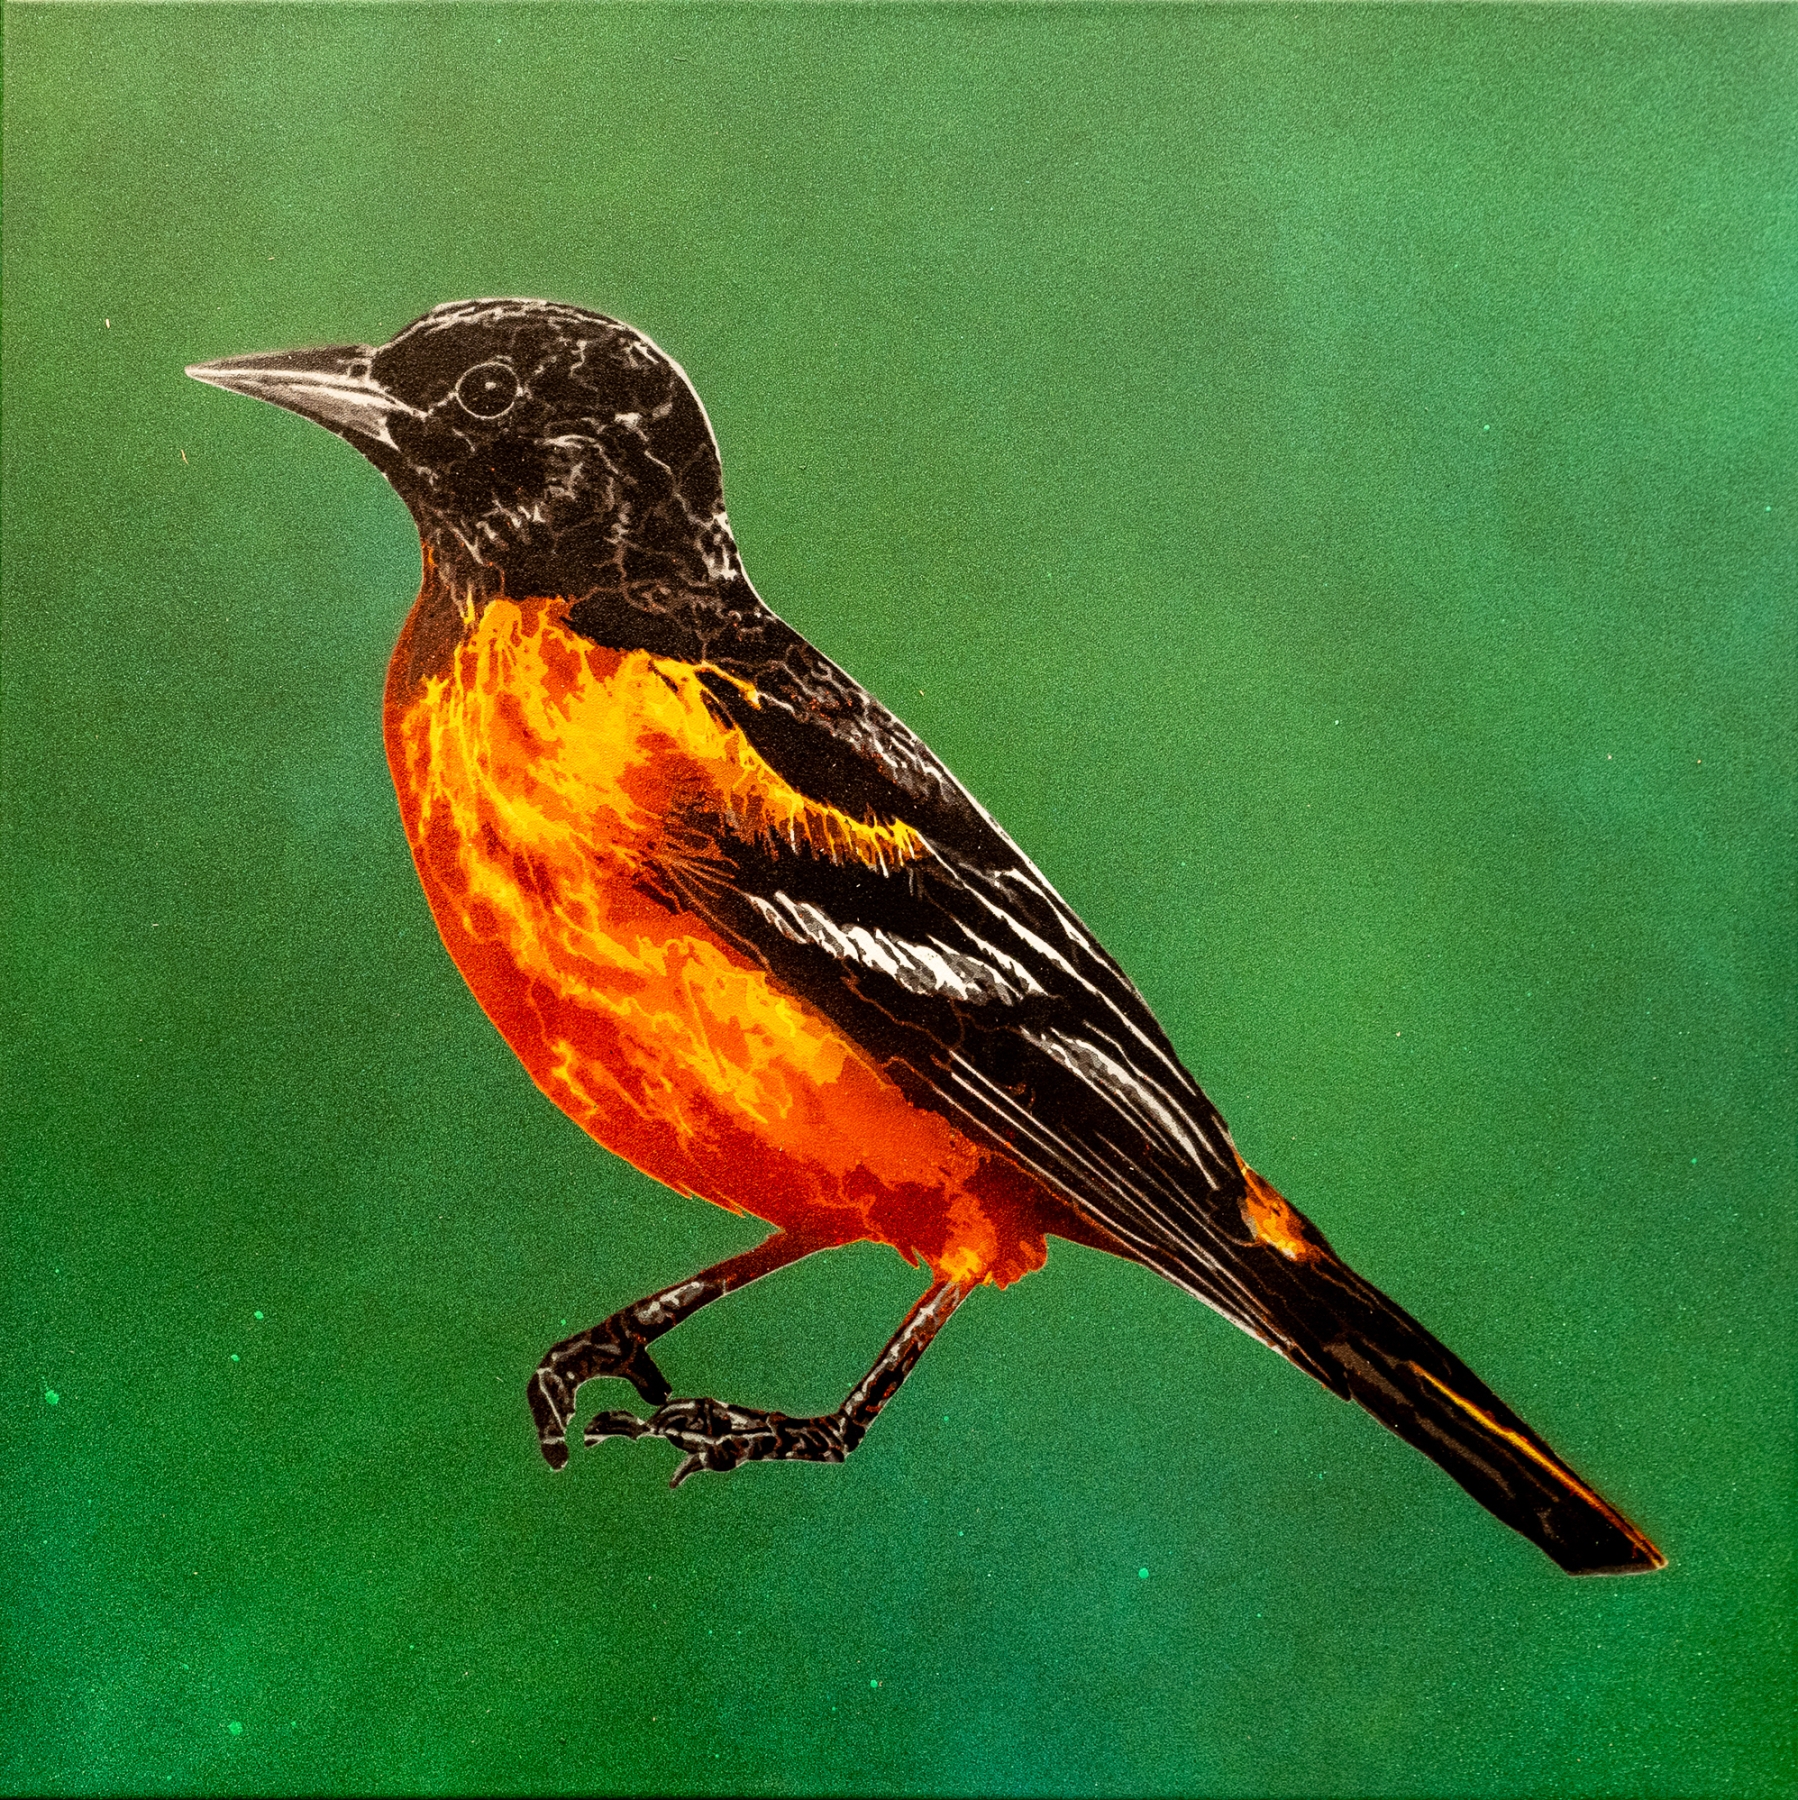 Baltimore Oriole, 2022
Painting on Canvas
30 x 30 in. (76.2 x 76.2 cm)
Signed and dated on verso
&amp;nbsp;